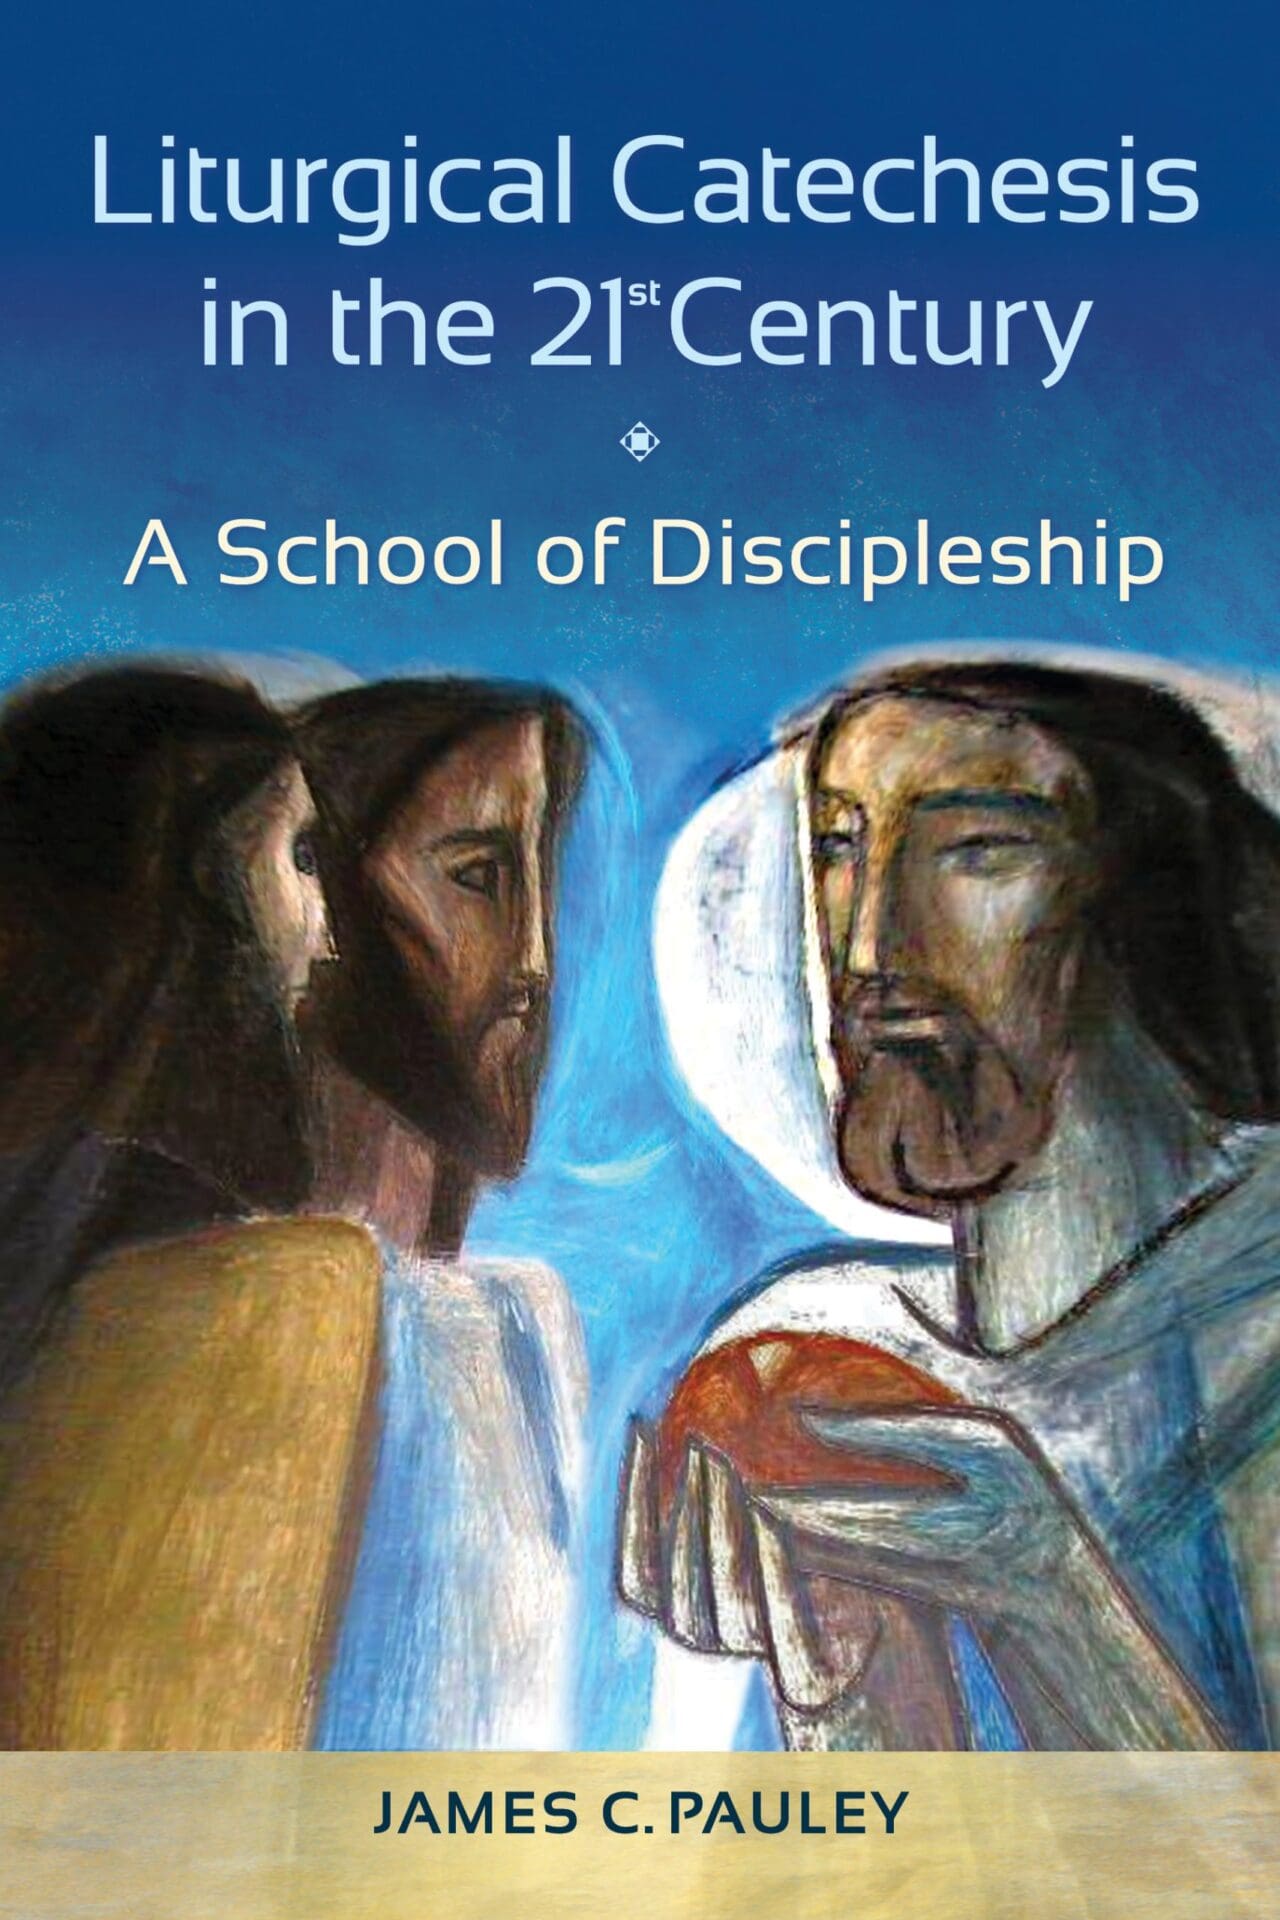 New Book on Christian Initiation Maps Out Where Liturgy, Catechism and Personal Conversion Meet